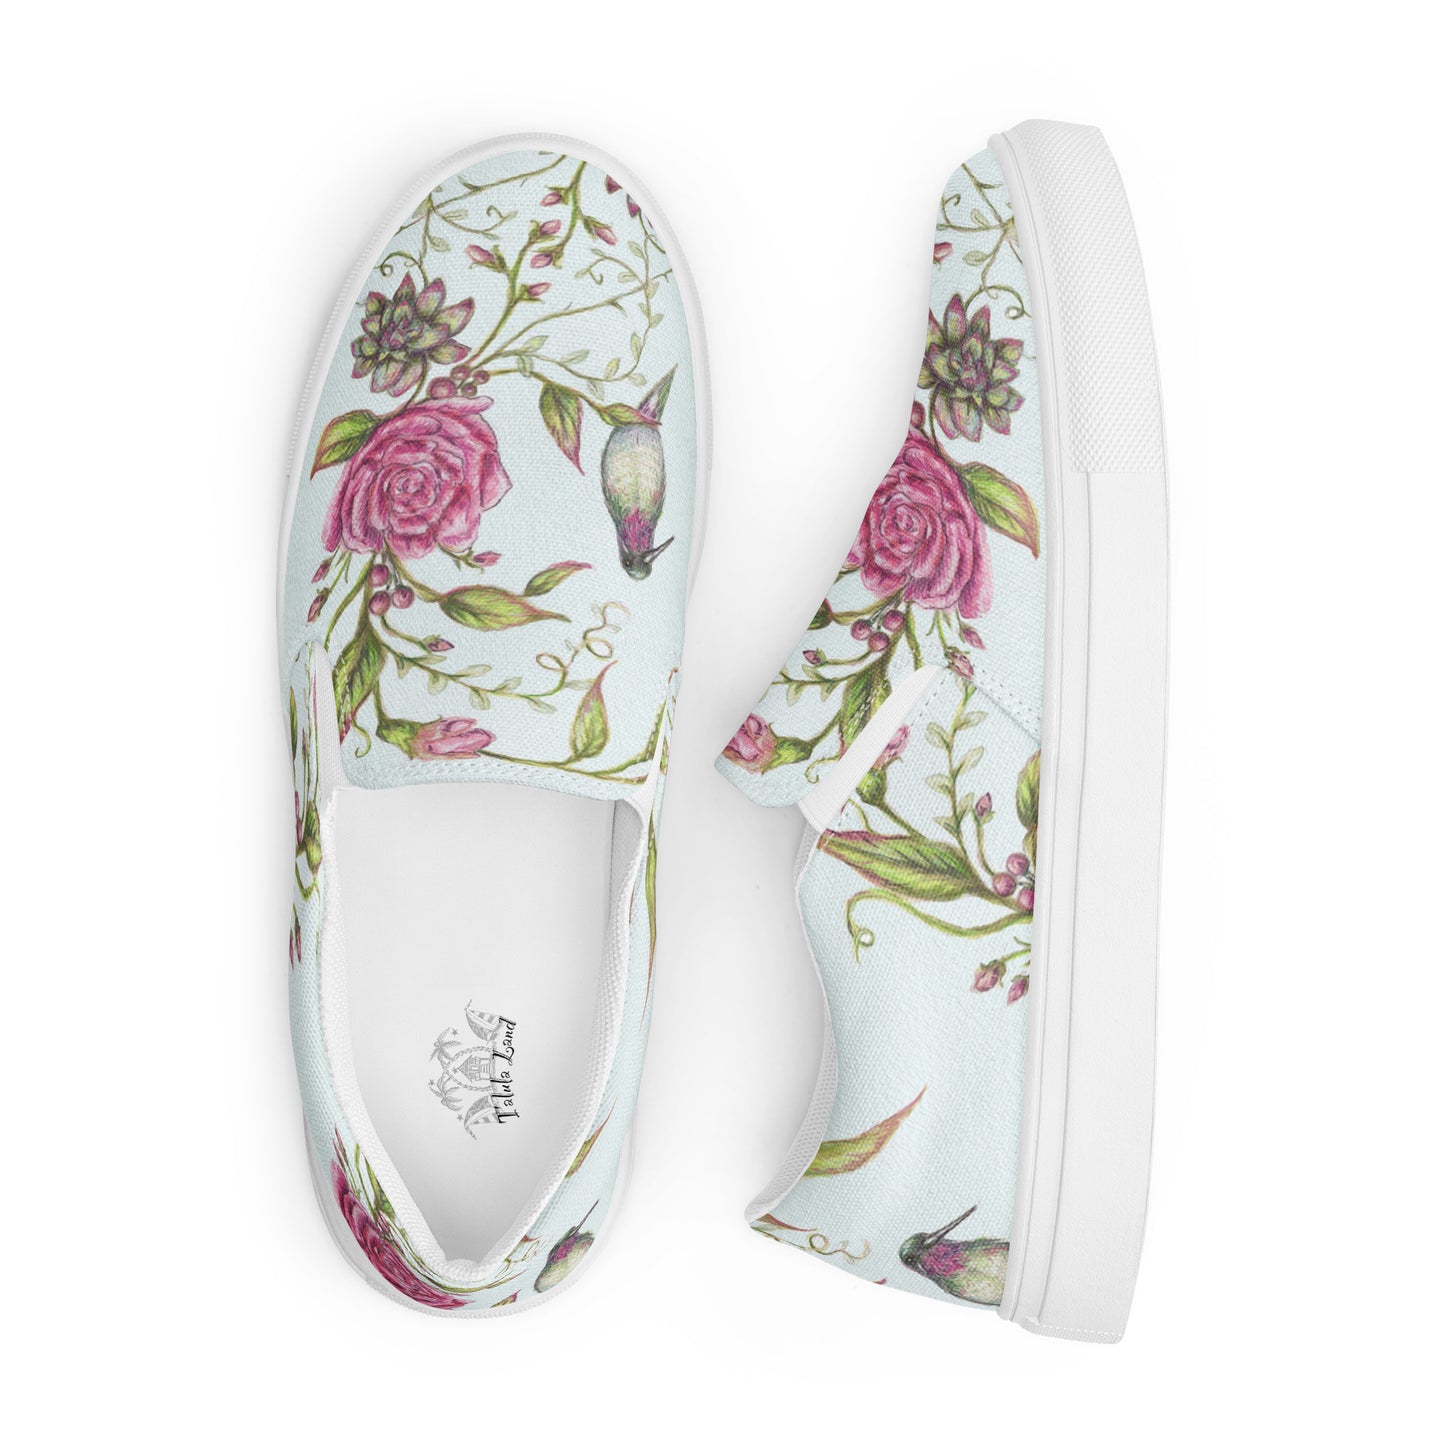 Humming Bird Women’s slip-on canvas shoes from Talula Land